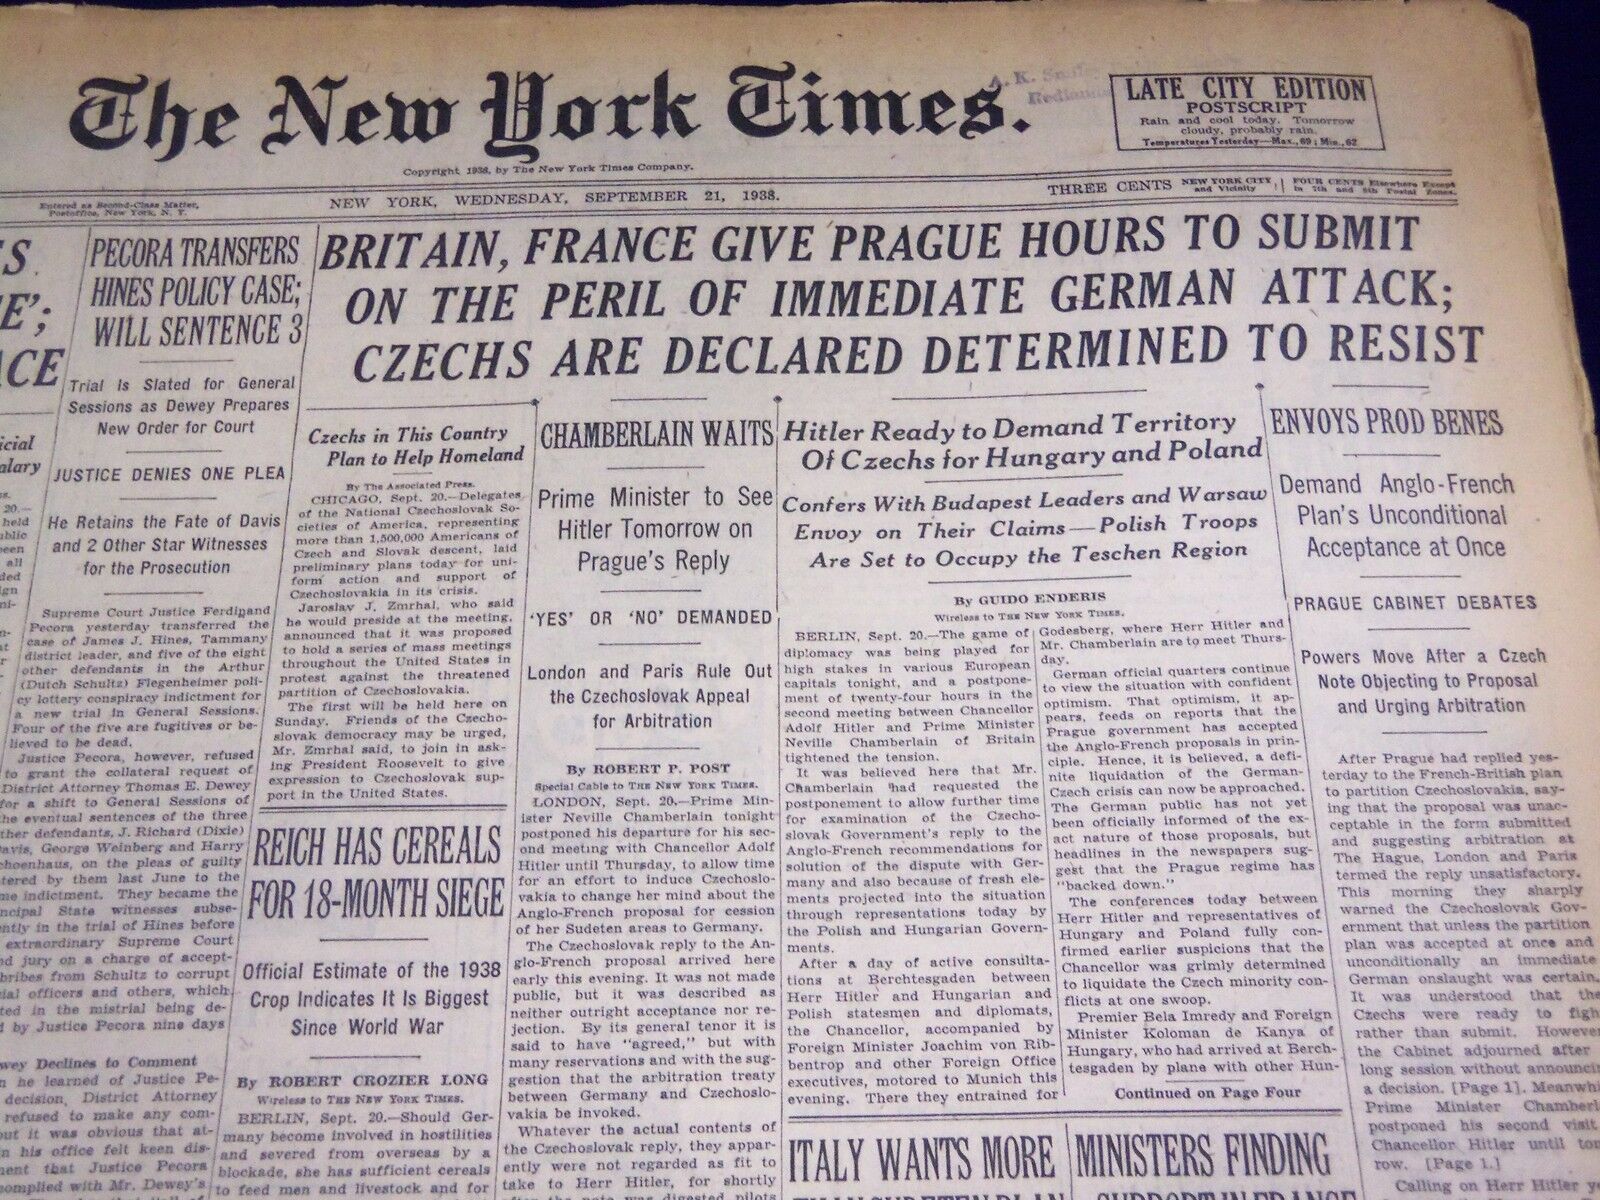 1938 SEPT 21 NEW YORK TIMES - BRITAIN FRANCE GIVE PRAGUE HOURS TO SUBMIT- NT 611